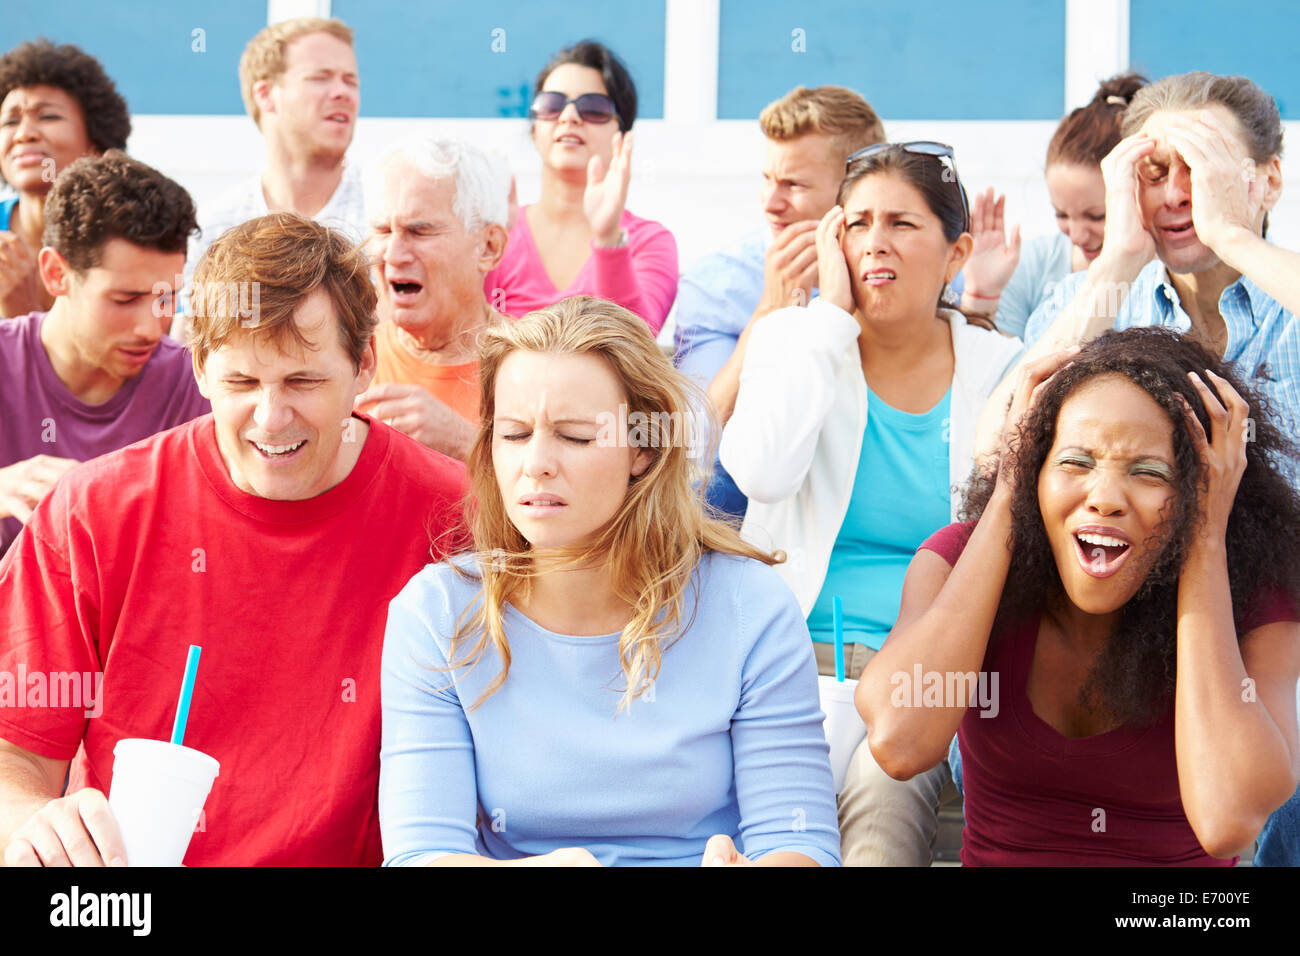 Disappointed Spectators At Outdoor Sports Event Stock Photo